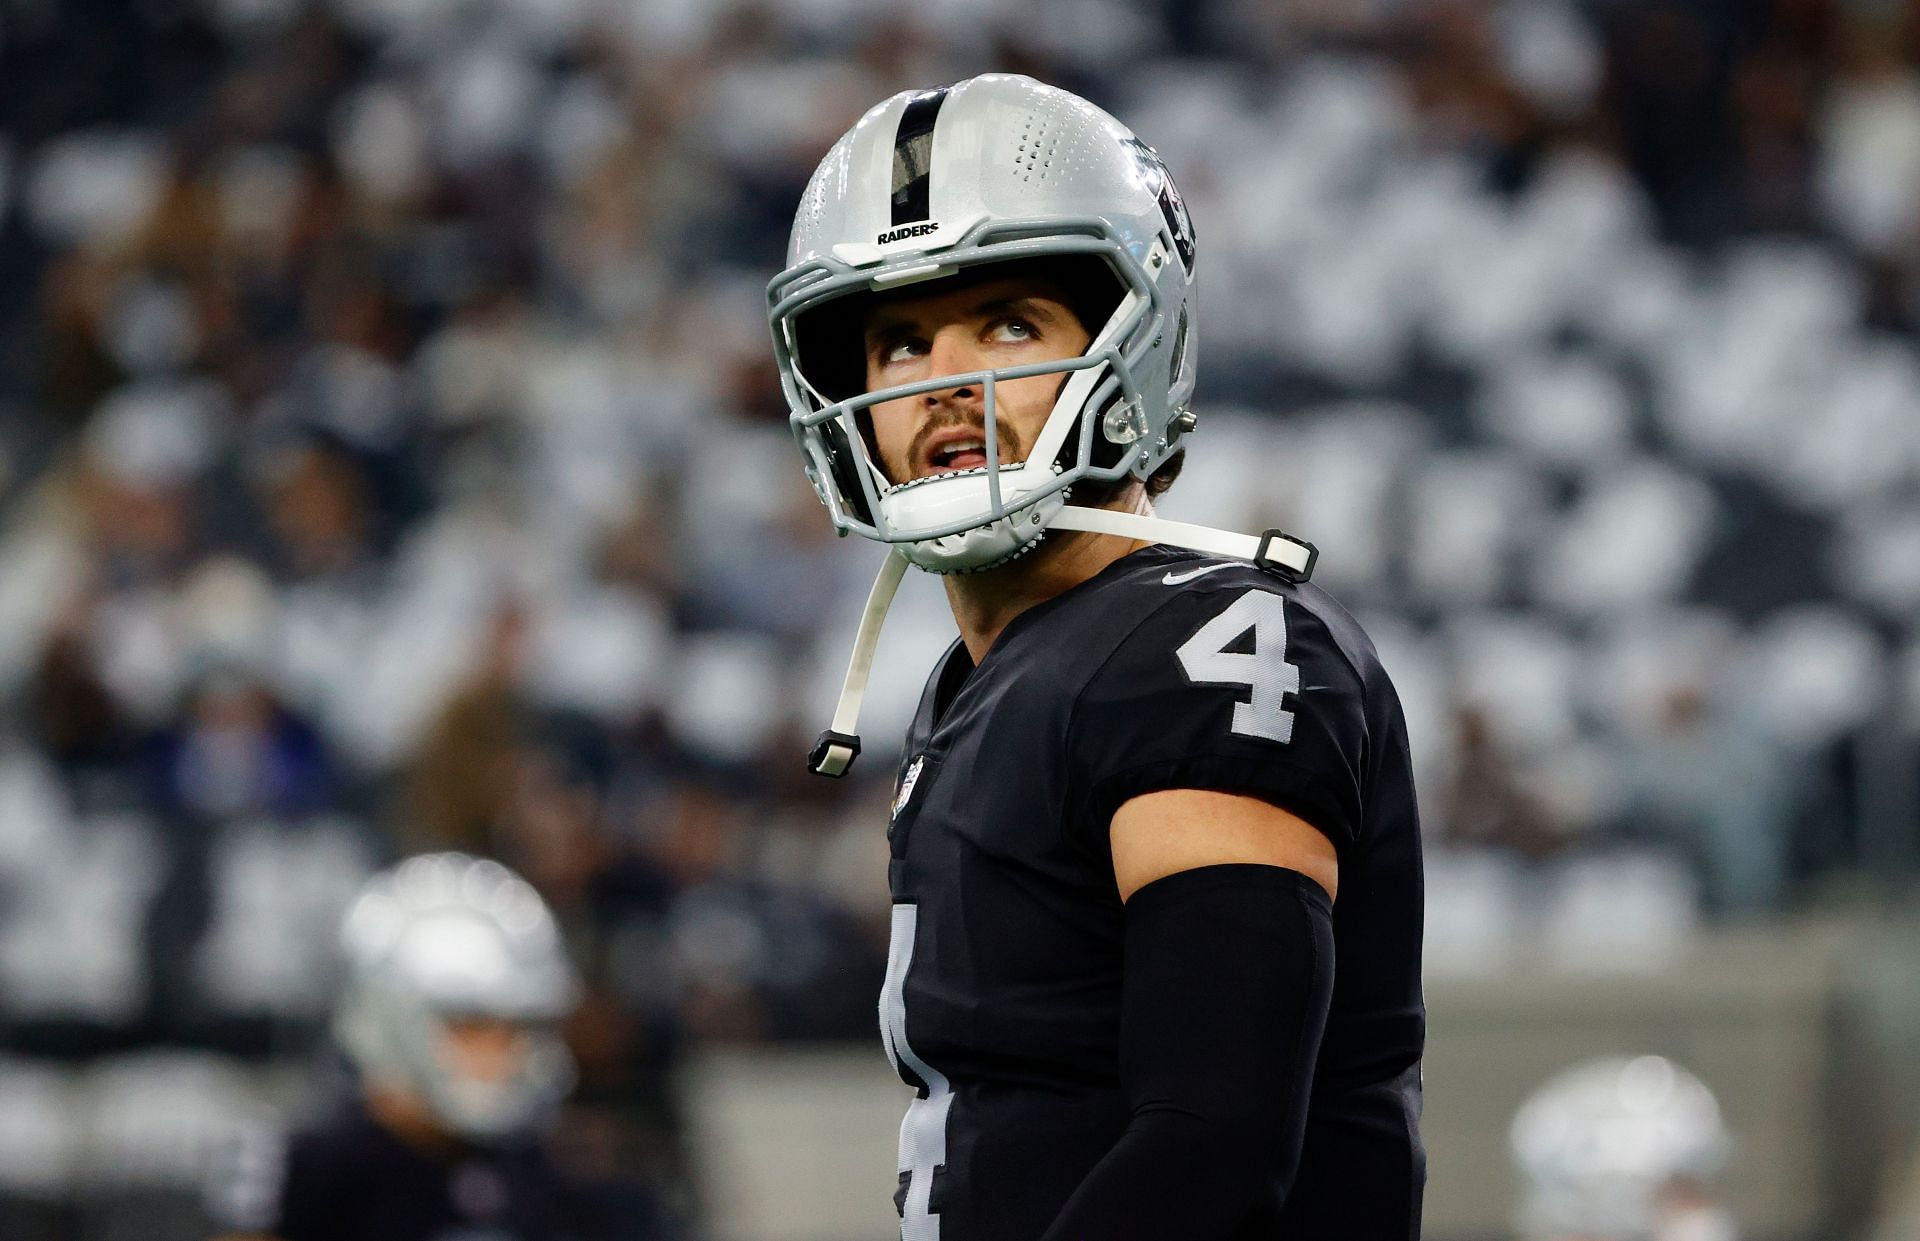 Raiders' Derek Carr nearly skipped NFL dream for life of ministry